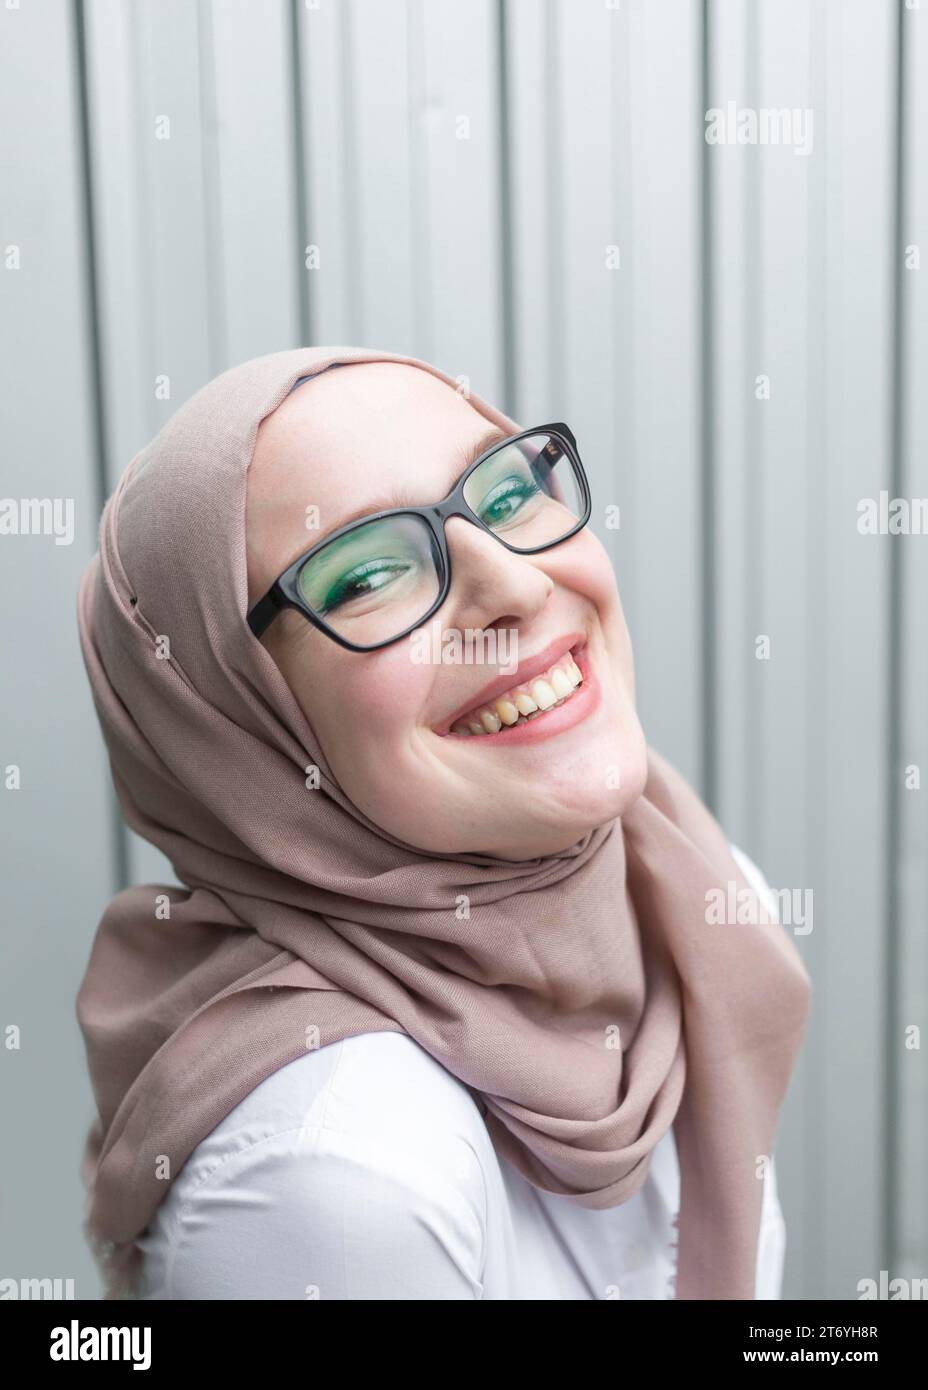 Smiling woman wearing glasses Stock Photo